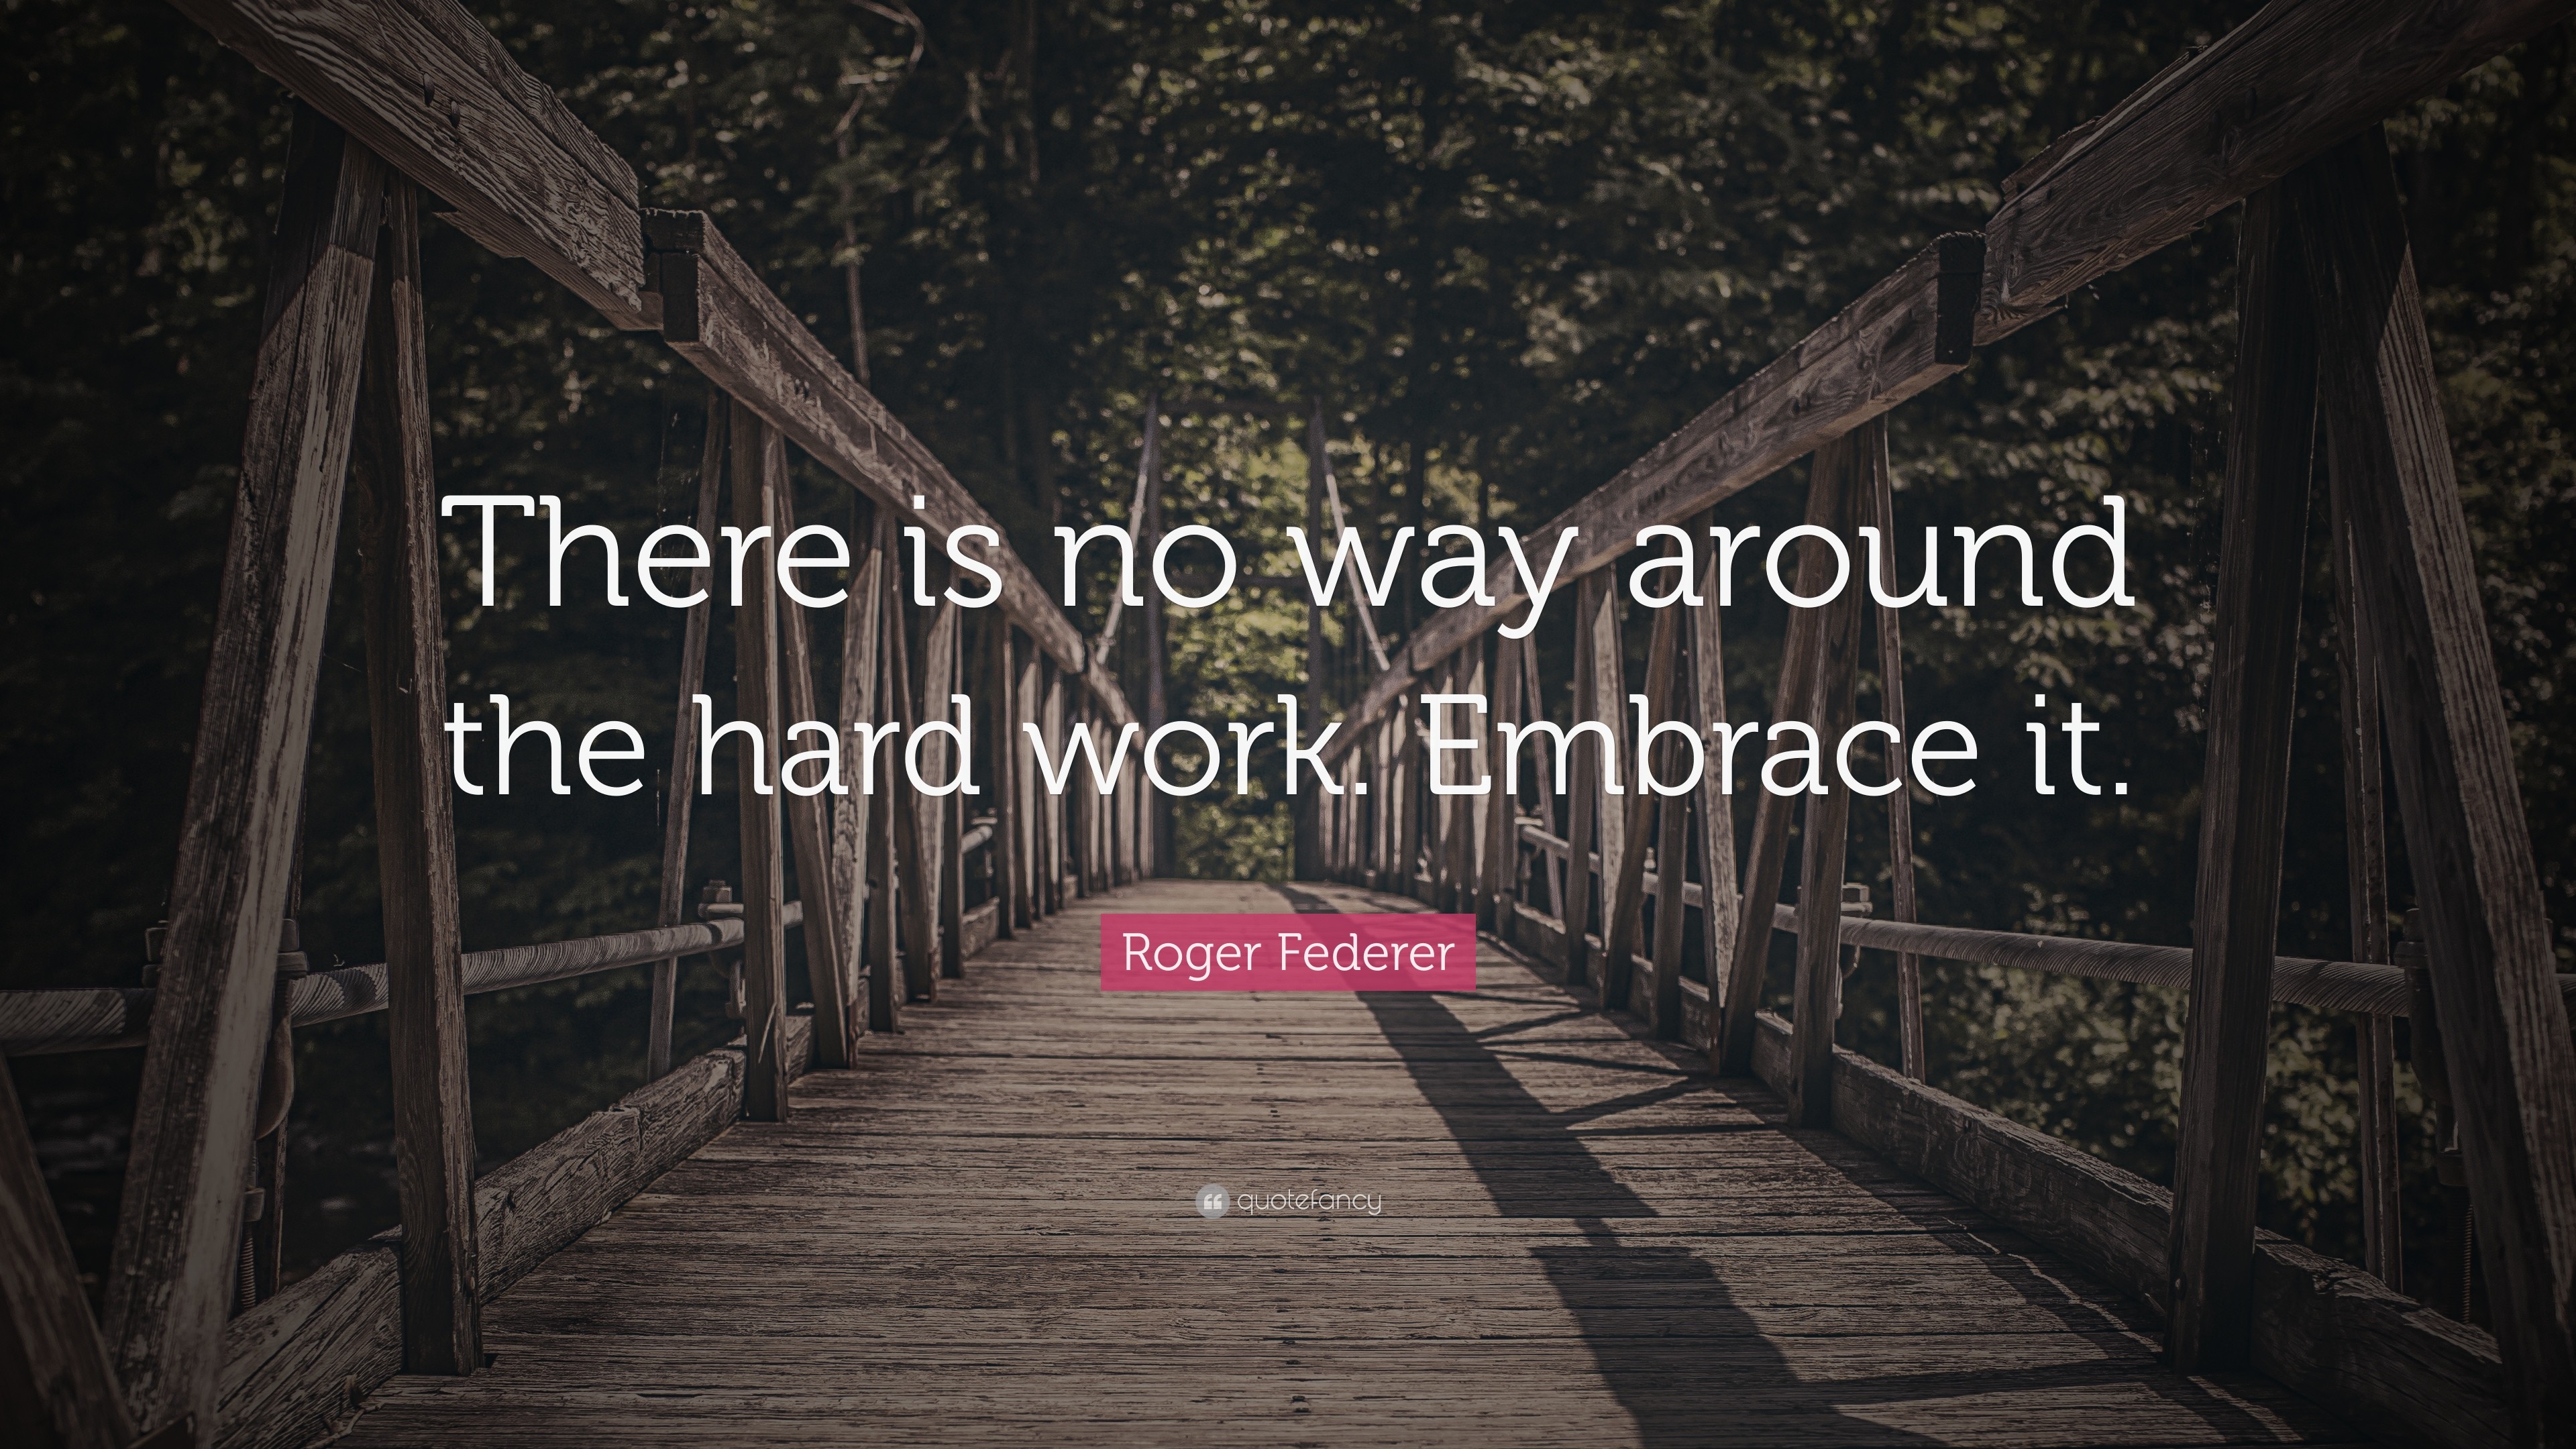 3840x2160 Hard Work Quotes: “There is no way around the hard work. Embrace it